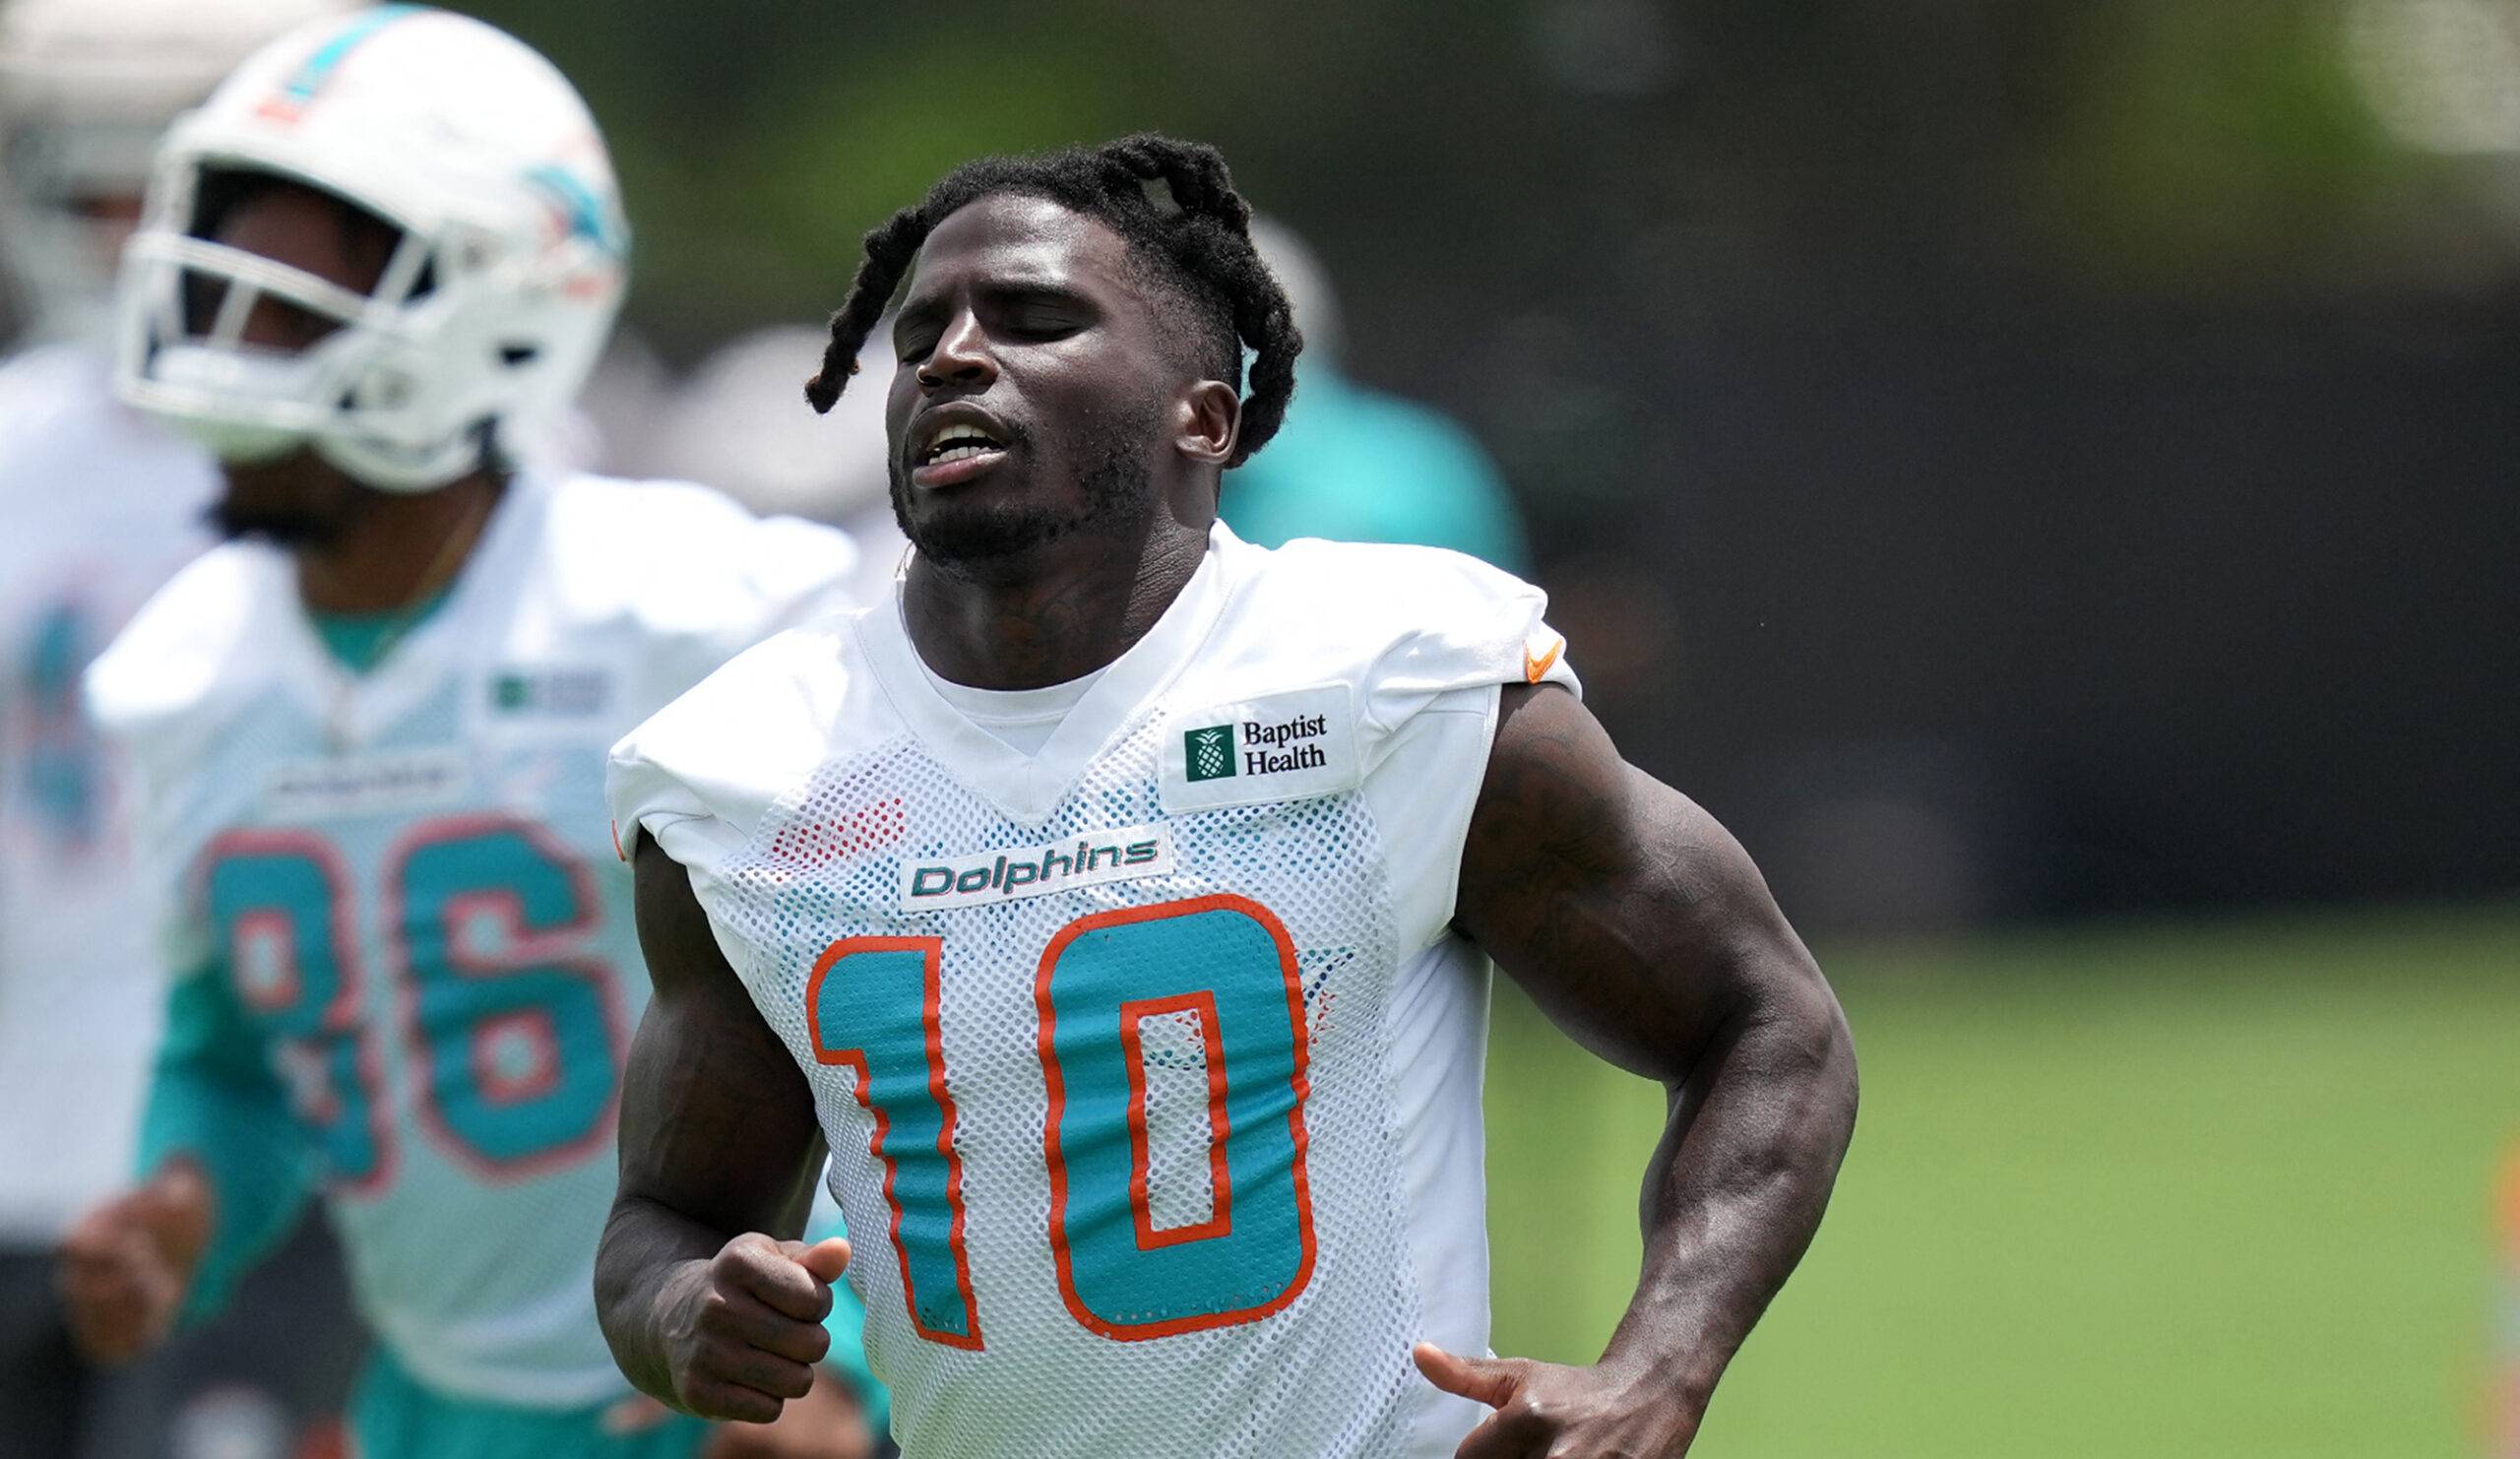 Tyreek Hill of the Miami Dolphins